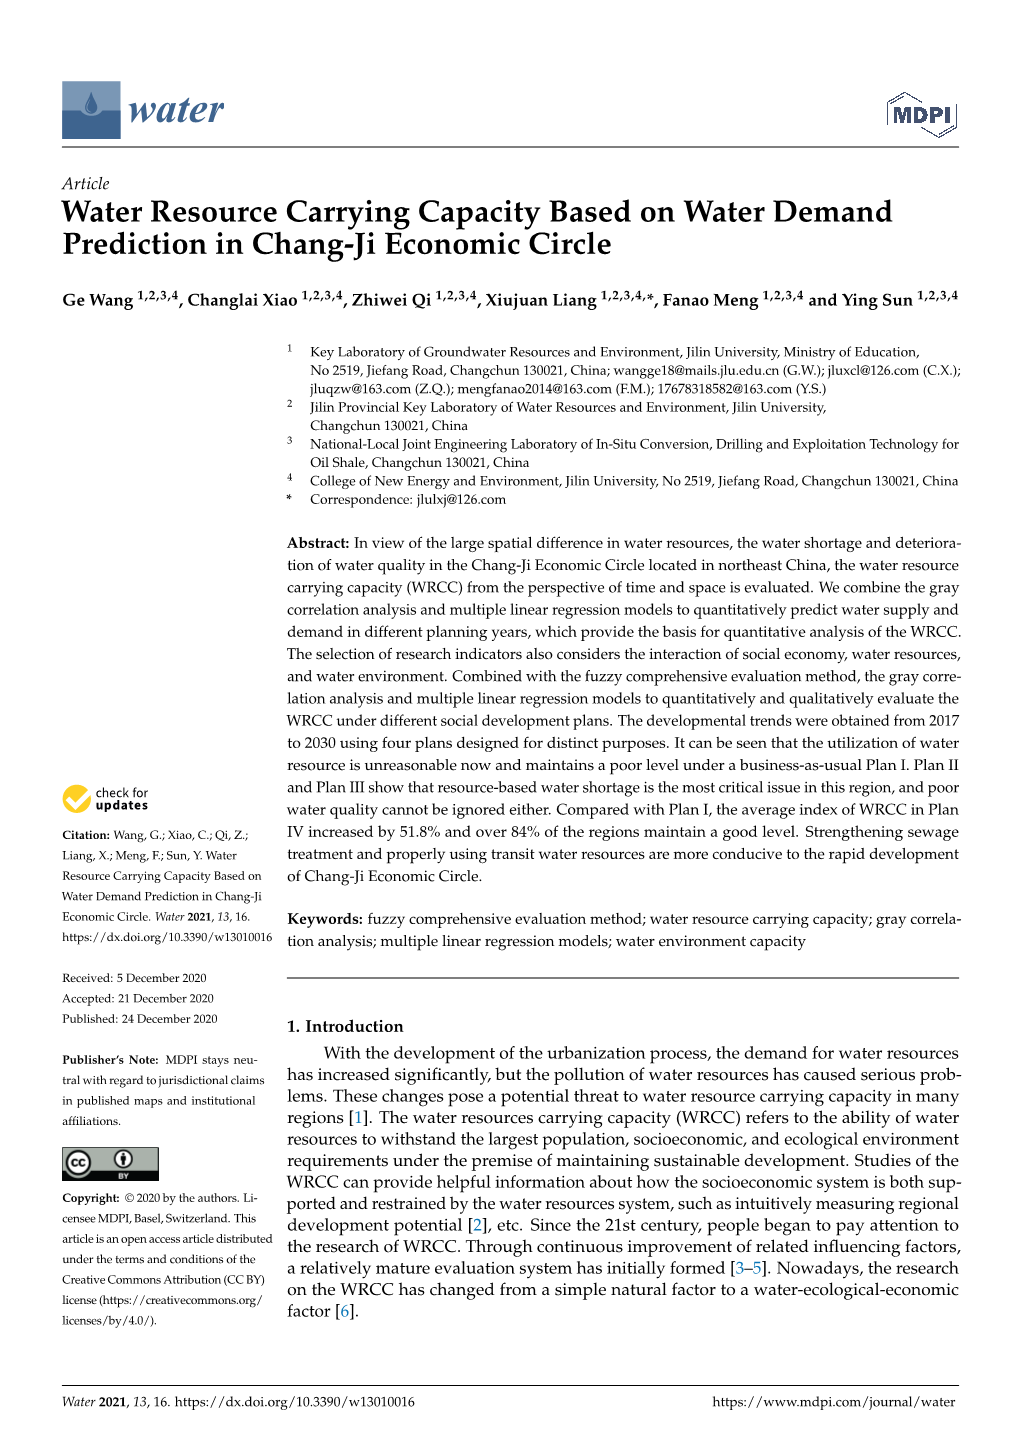 Water Resource Carrying Capacity Based on Water Demand Prediction in Chang-Ji Economic Circle